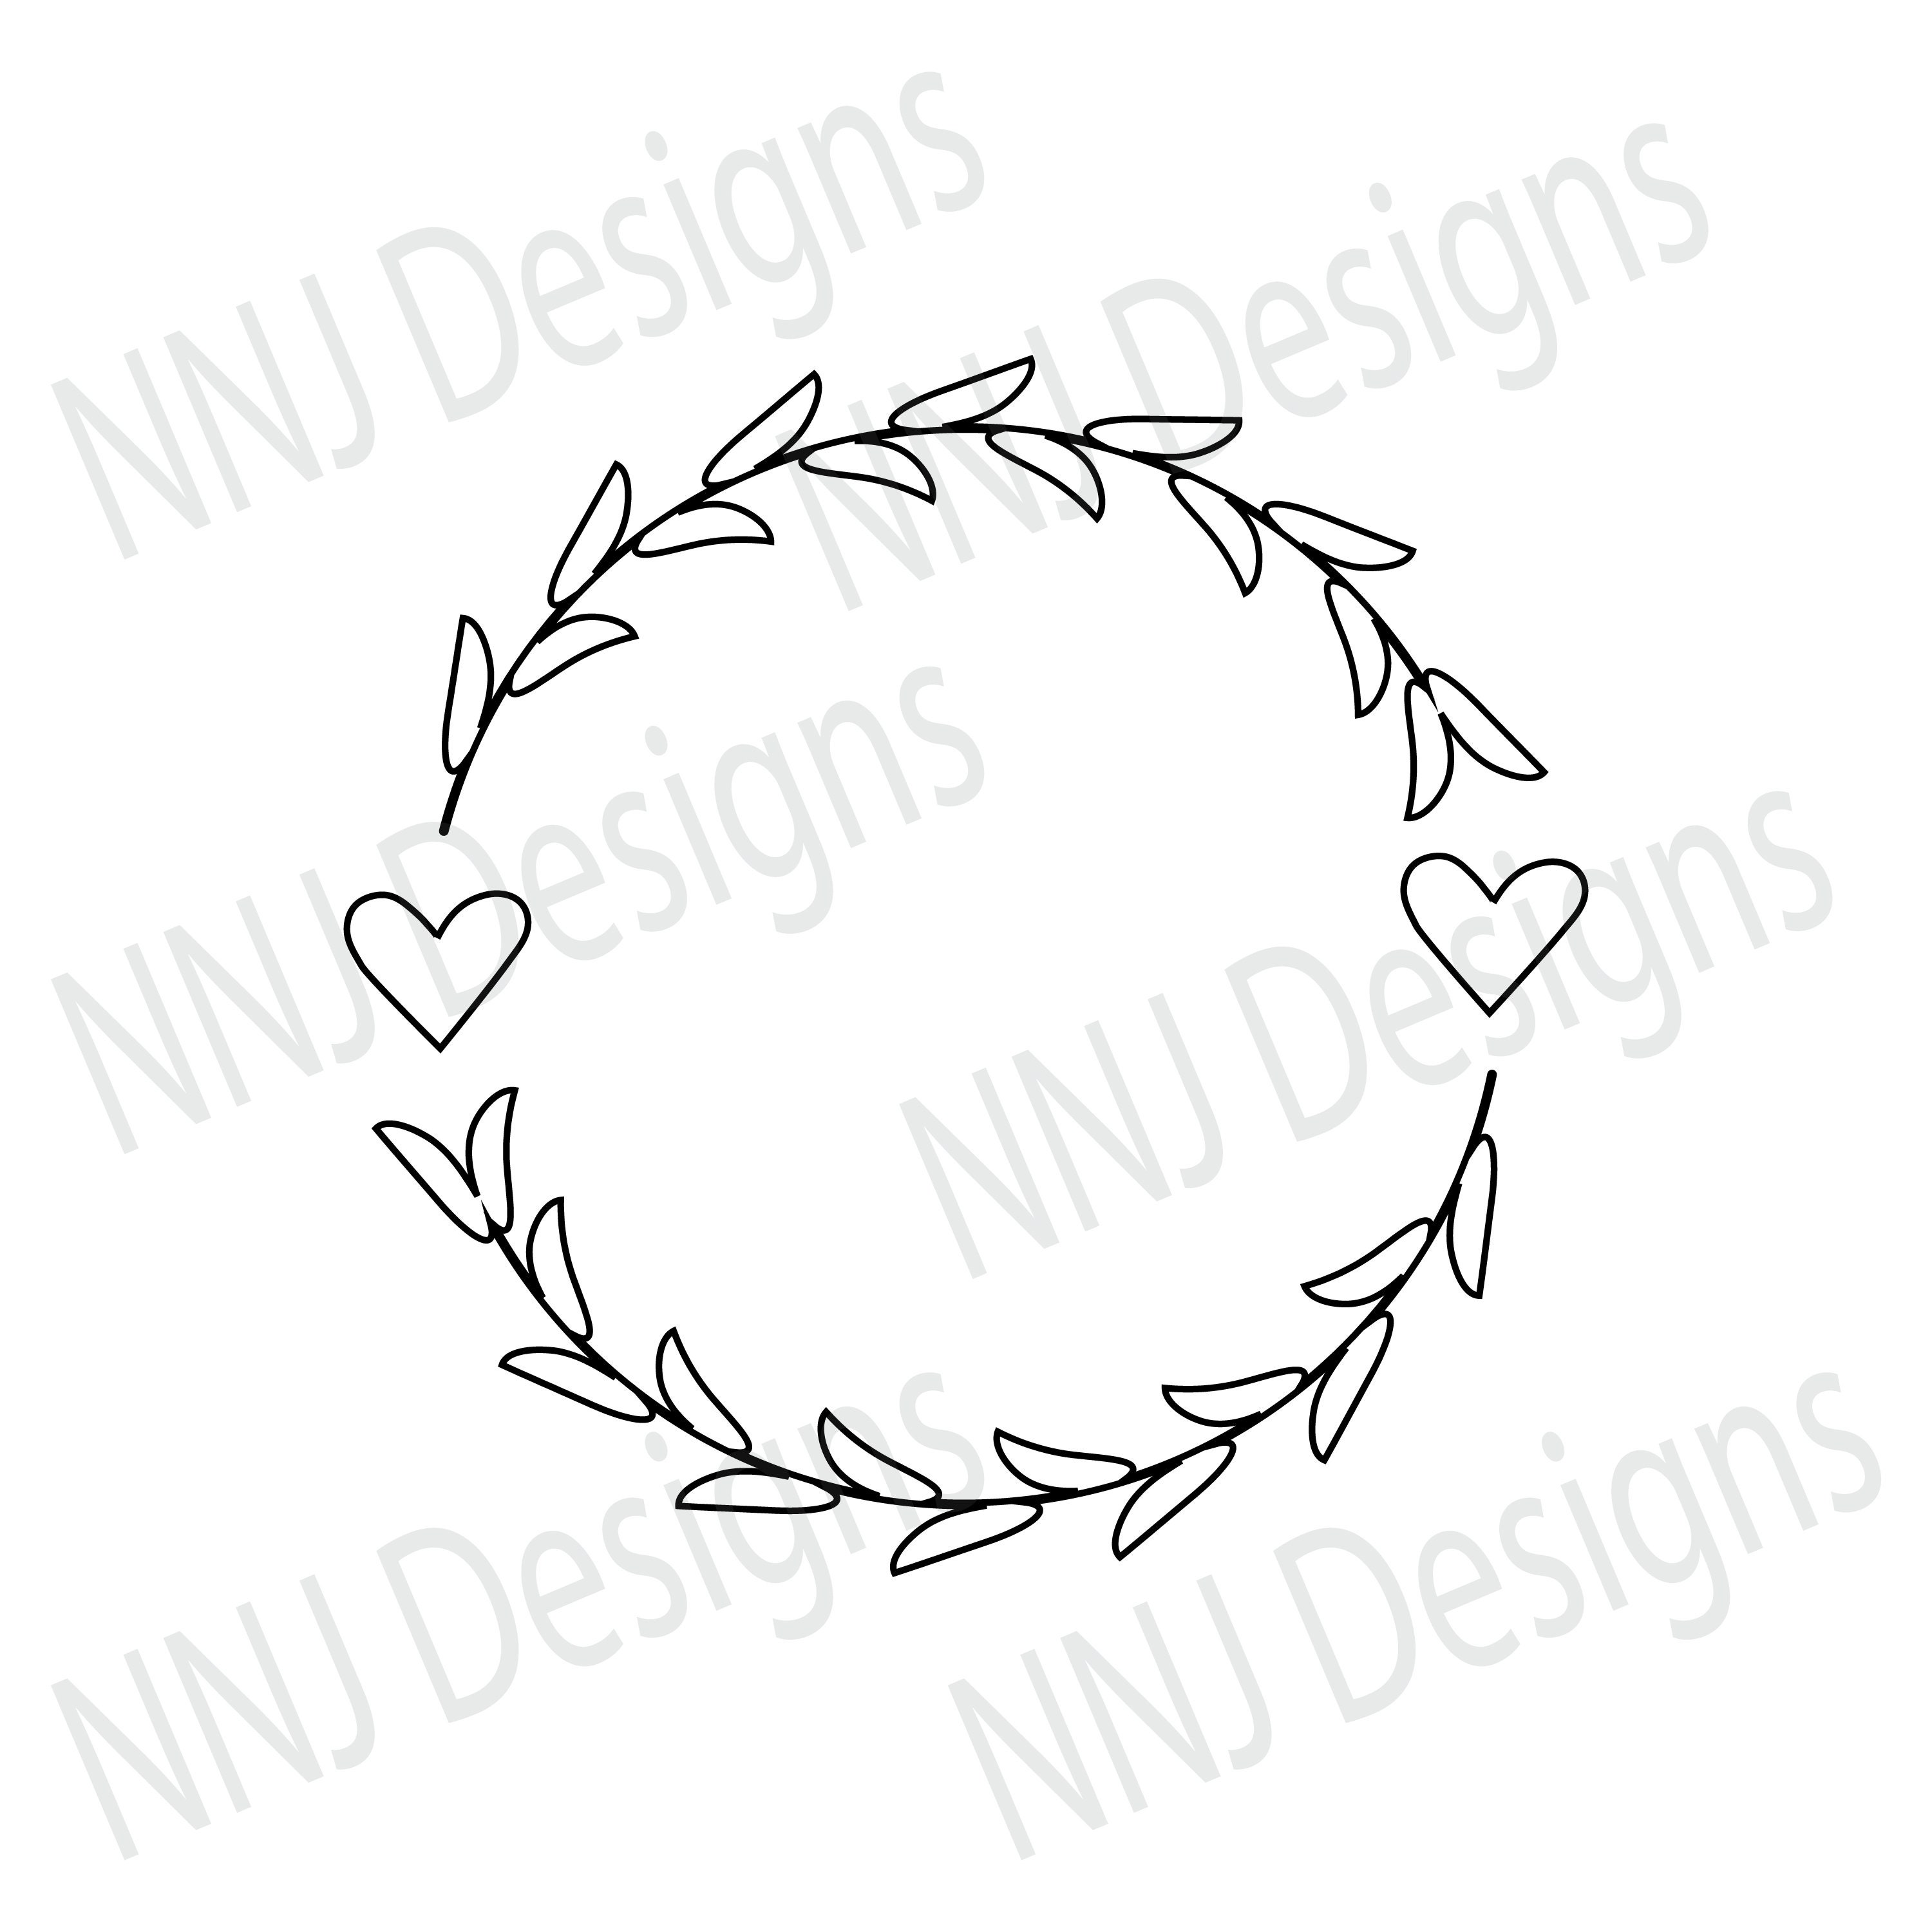 Floral Heart Wreath Frame Leaves SVG Graphic by NNJ Designs